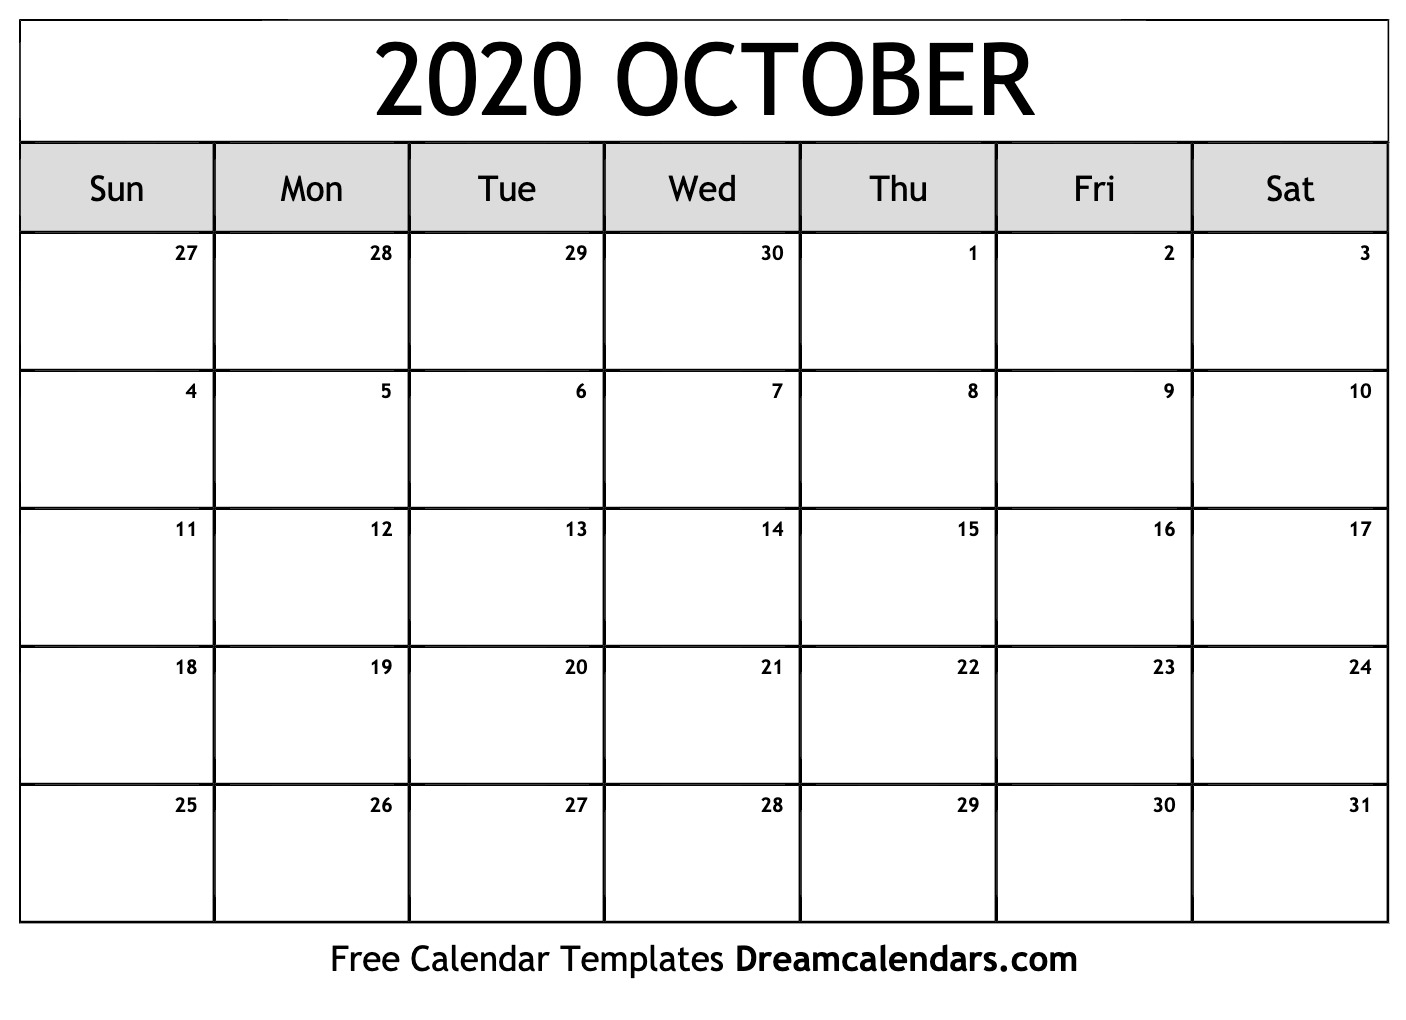 October 2020 calendar Free blank printable with holidays